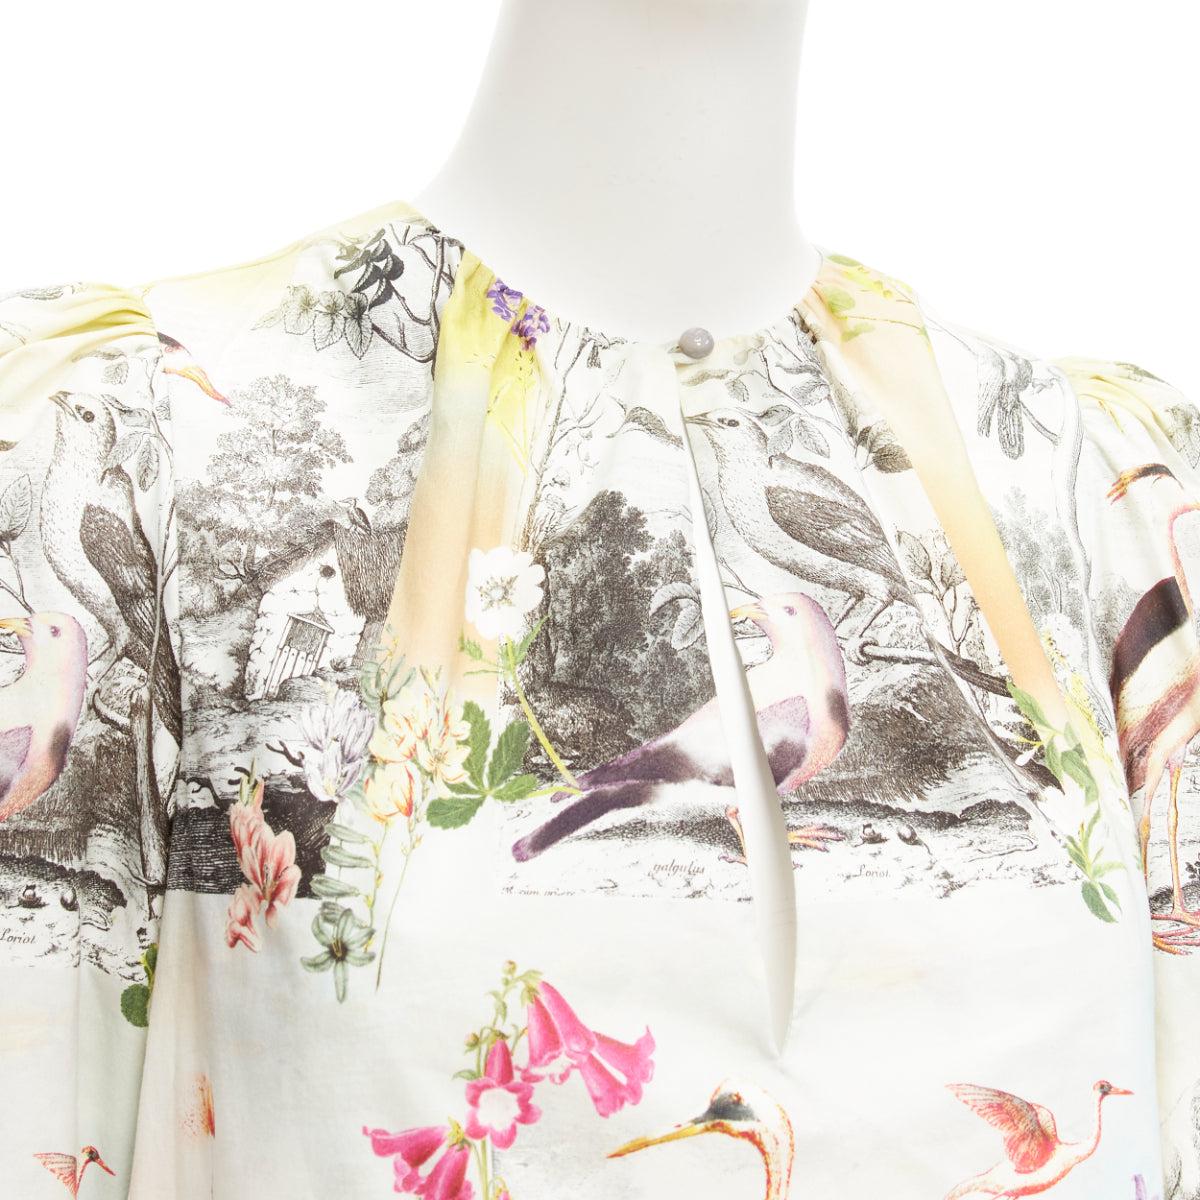 ETRO multicolor floral birds paradise print keyhole crop sleeves blouse IT38 XS
Reference: AAWC/A00738
Brand: Etro
Material: Cotton
Color: Multicolour
Pattern: Floral
Closure: Keyhole Button
Extra Details: Front keyhole closure.
Made in: